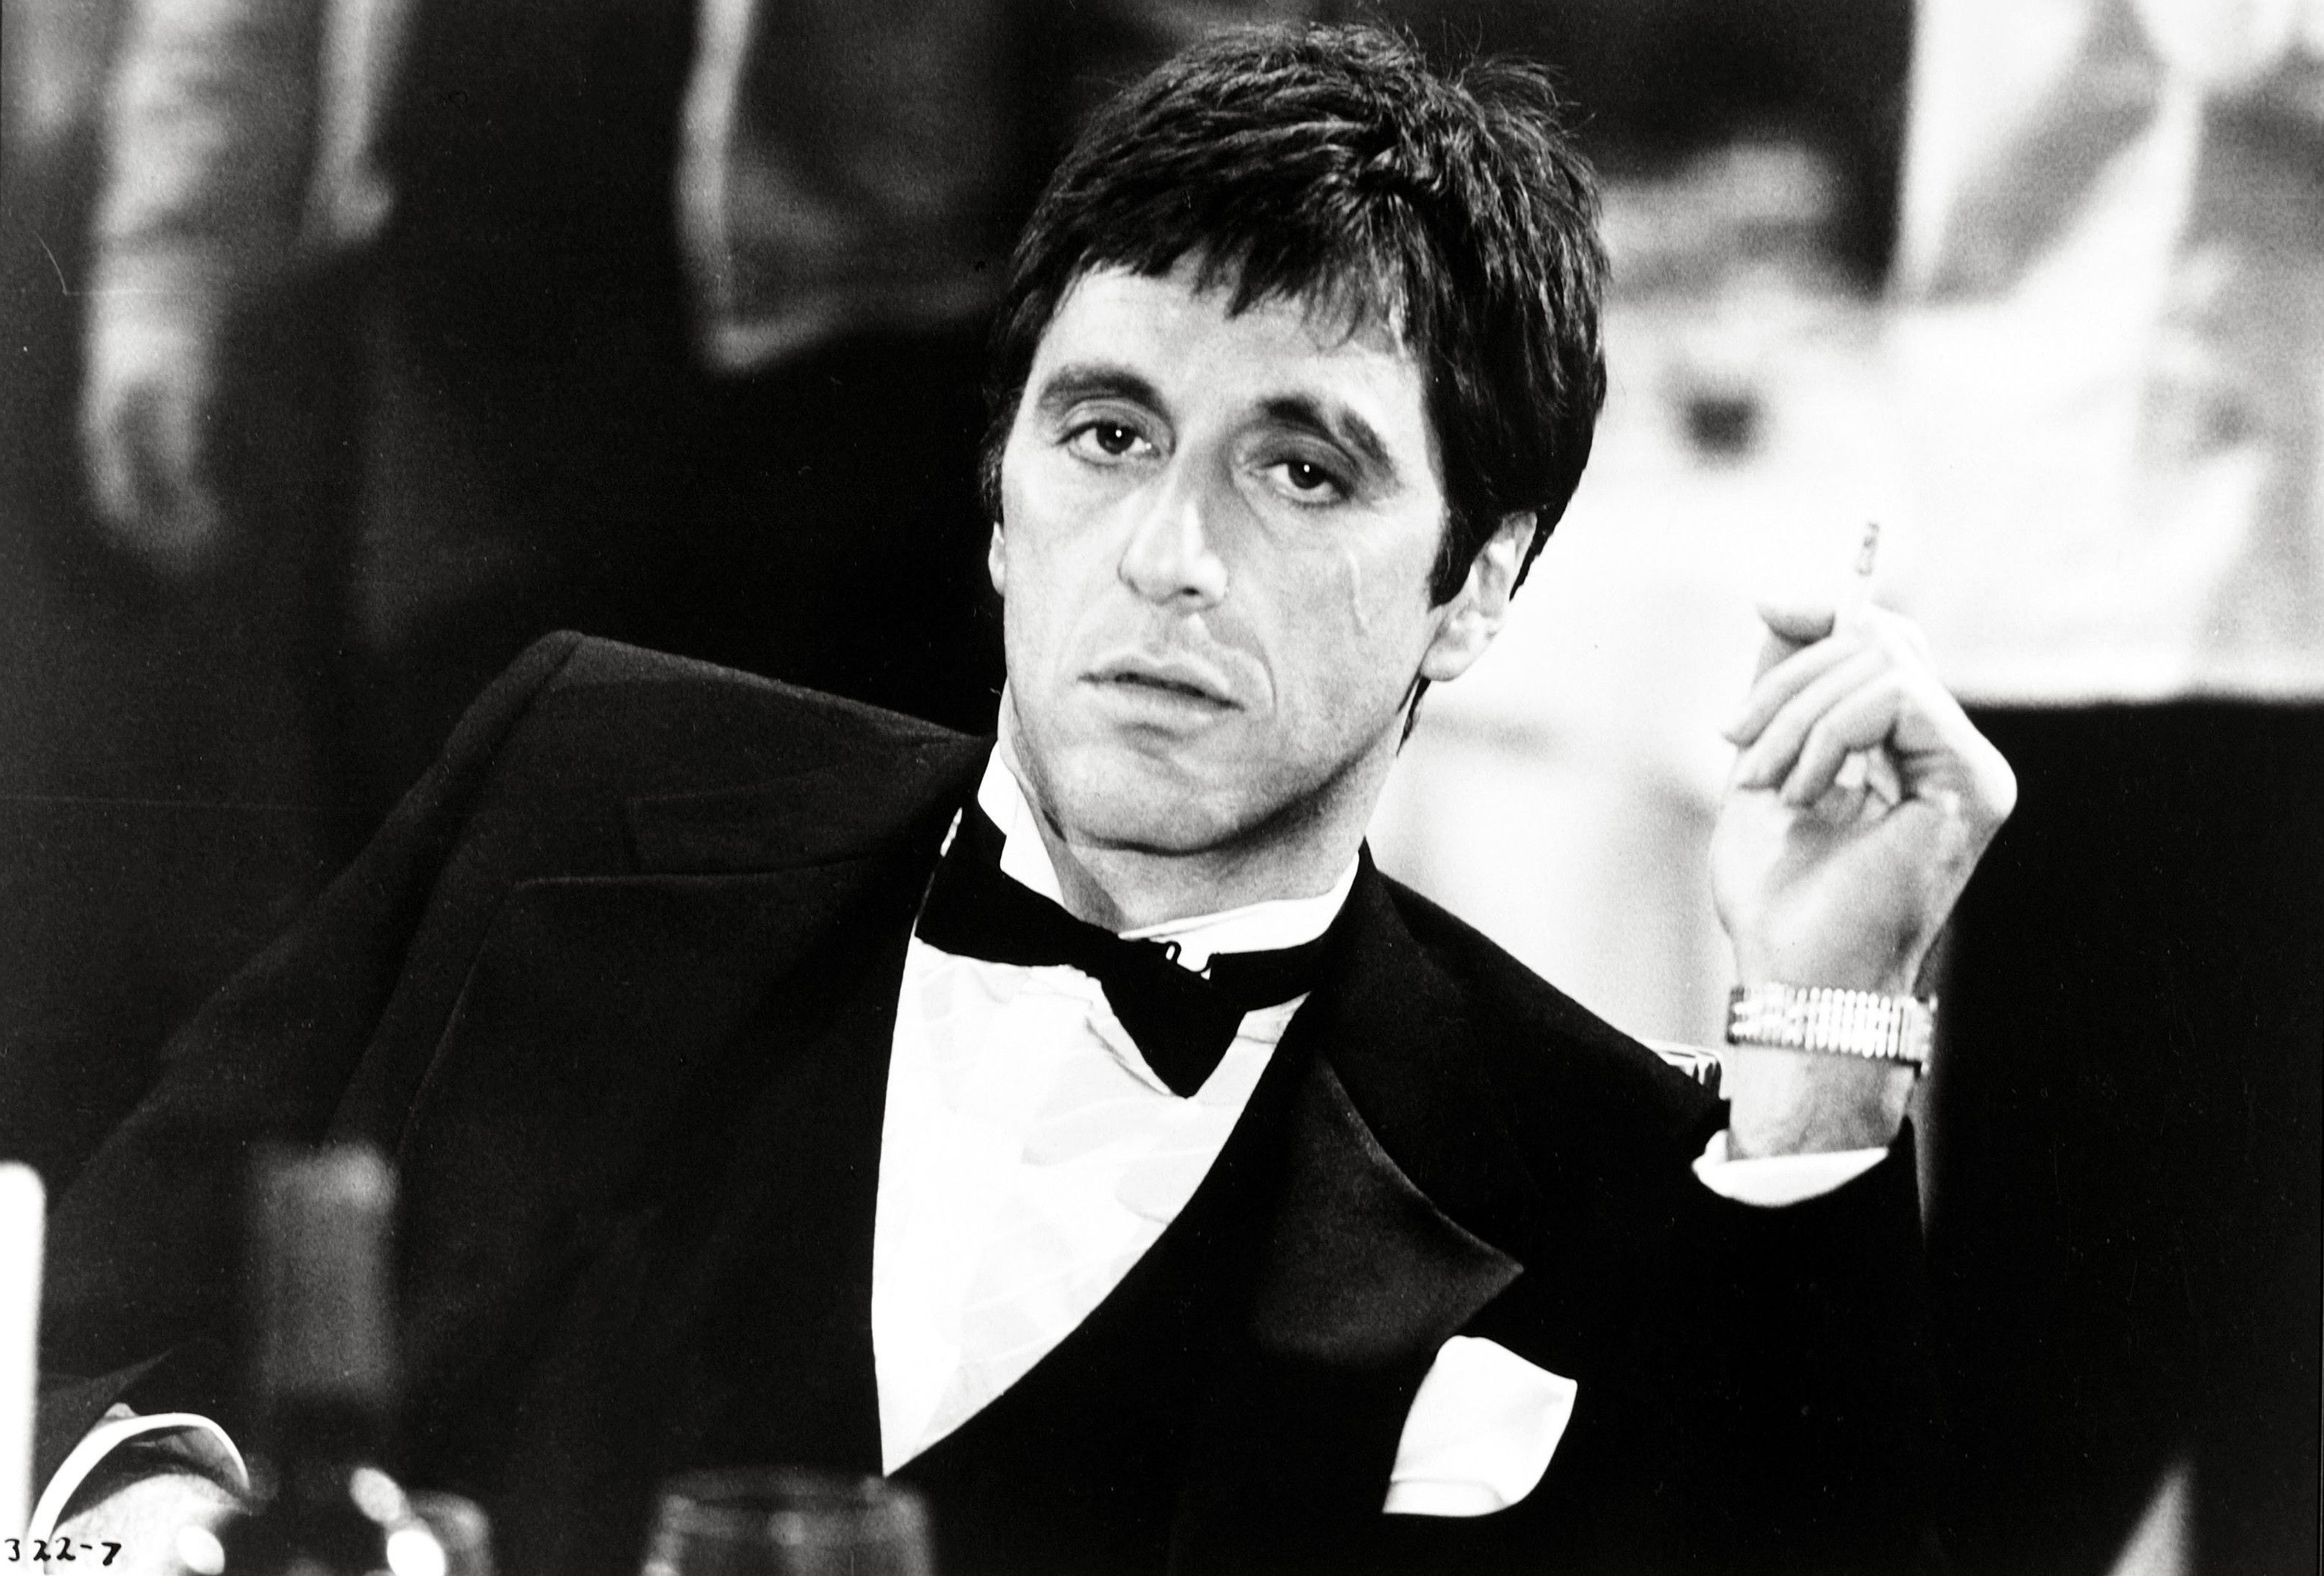 scarface wallpaper hd,photograph,black and white,suit,photography,formal wear